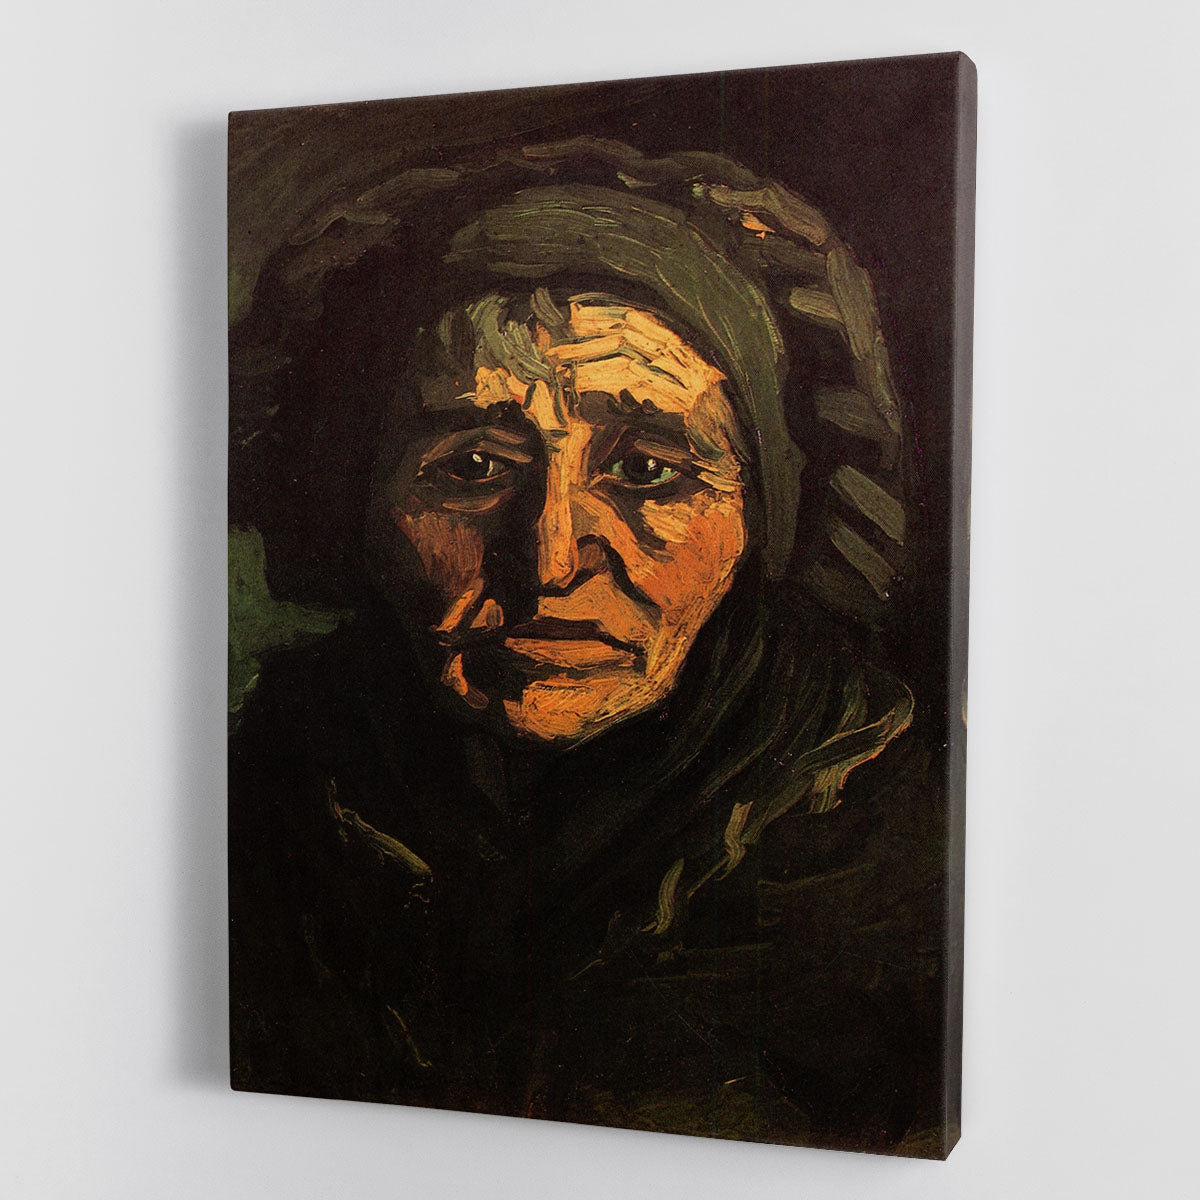 Head of a Peasant Woman with Greenish Lace Cap by Van Gogh Canvas Print or Poster - Canvas Art Rocks - 1